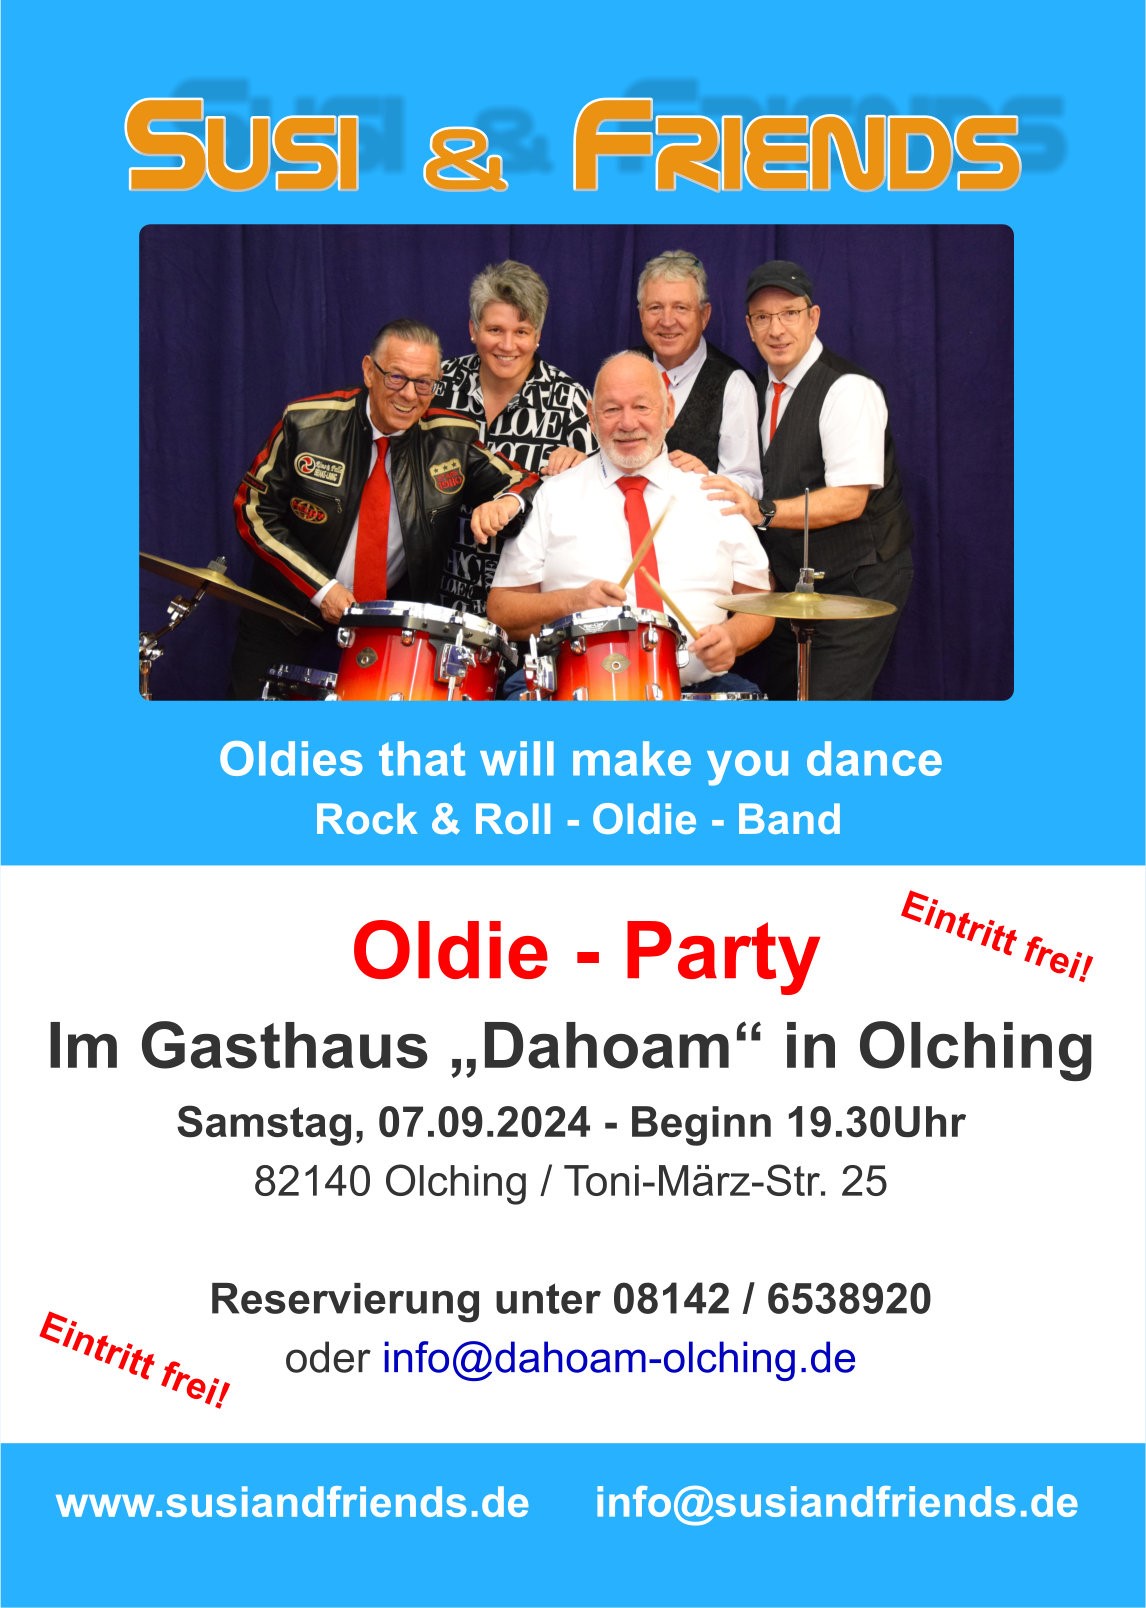 Featured image for “Oldie-Party am 07.09.2024”